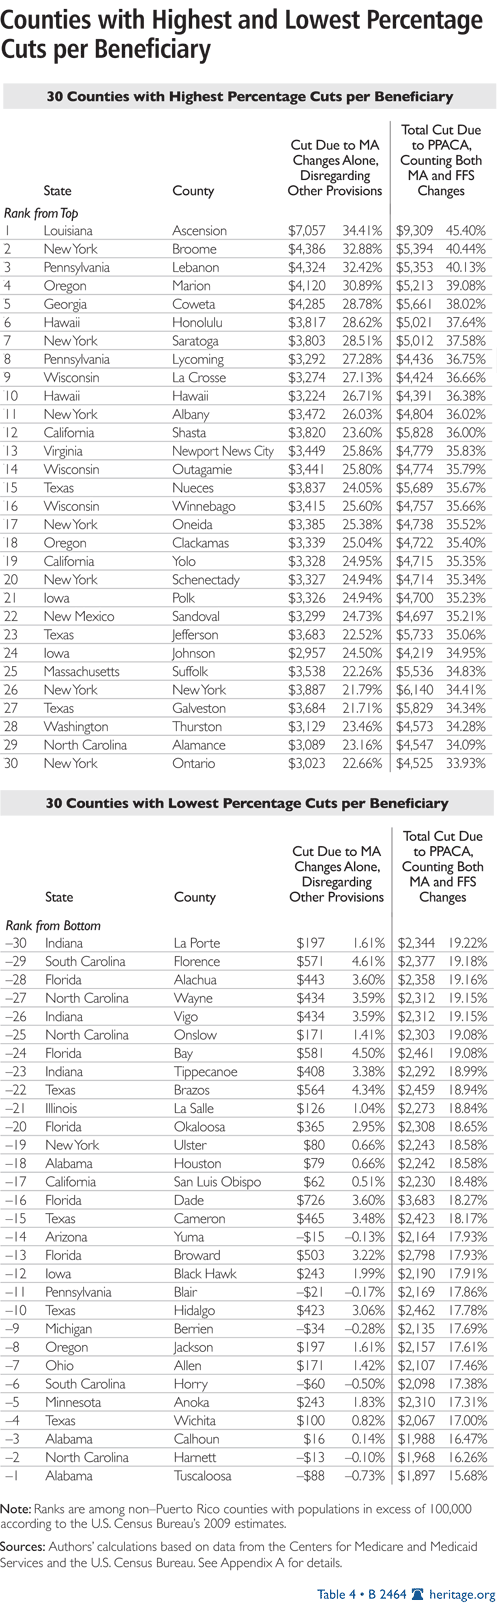 Counties with Highest and Lowest Percentage Cuts per Beneficiary